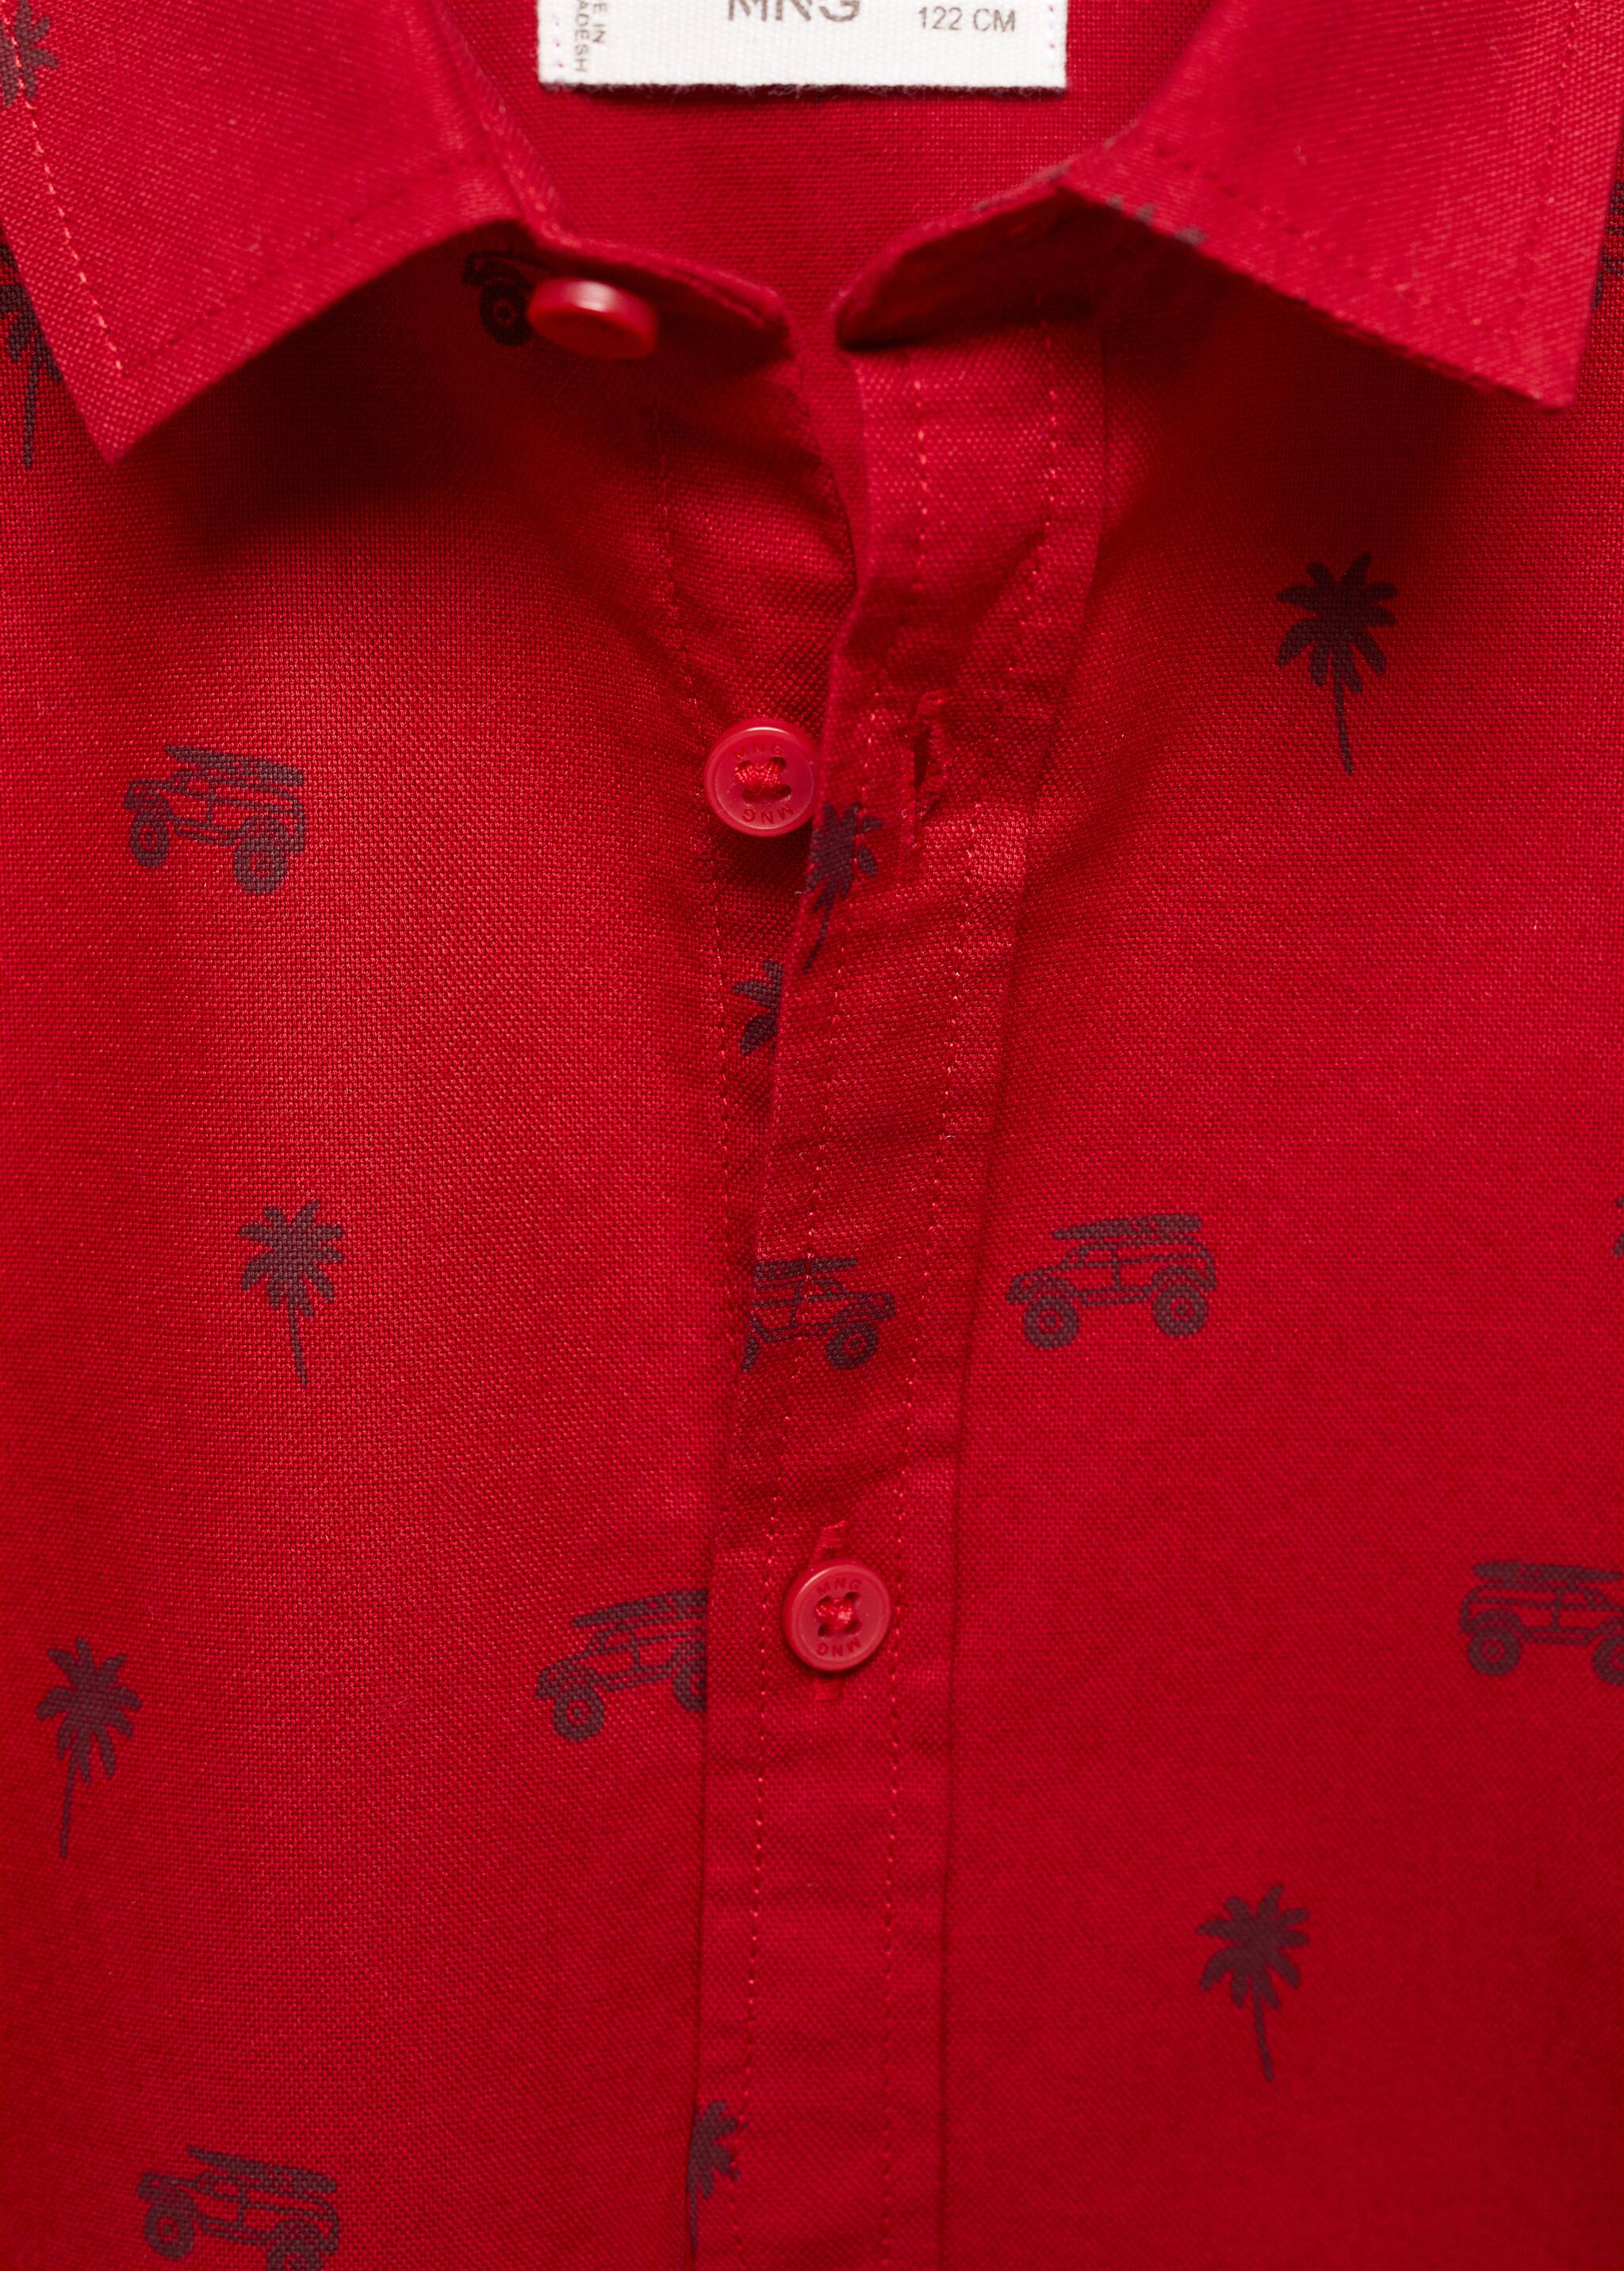 Printed cotton shirt - Details of the article 8